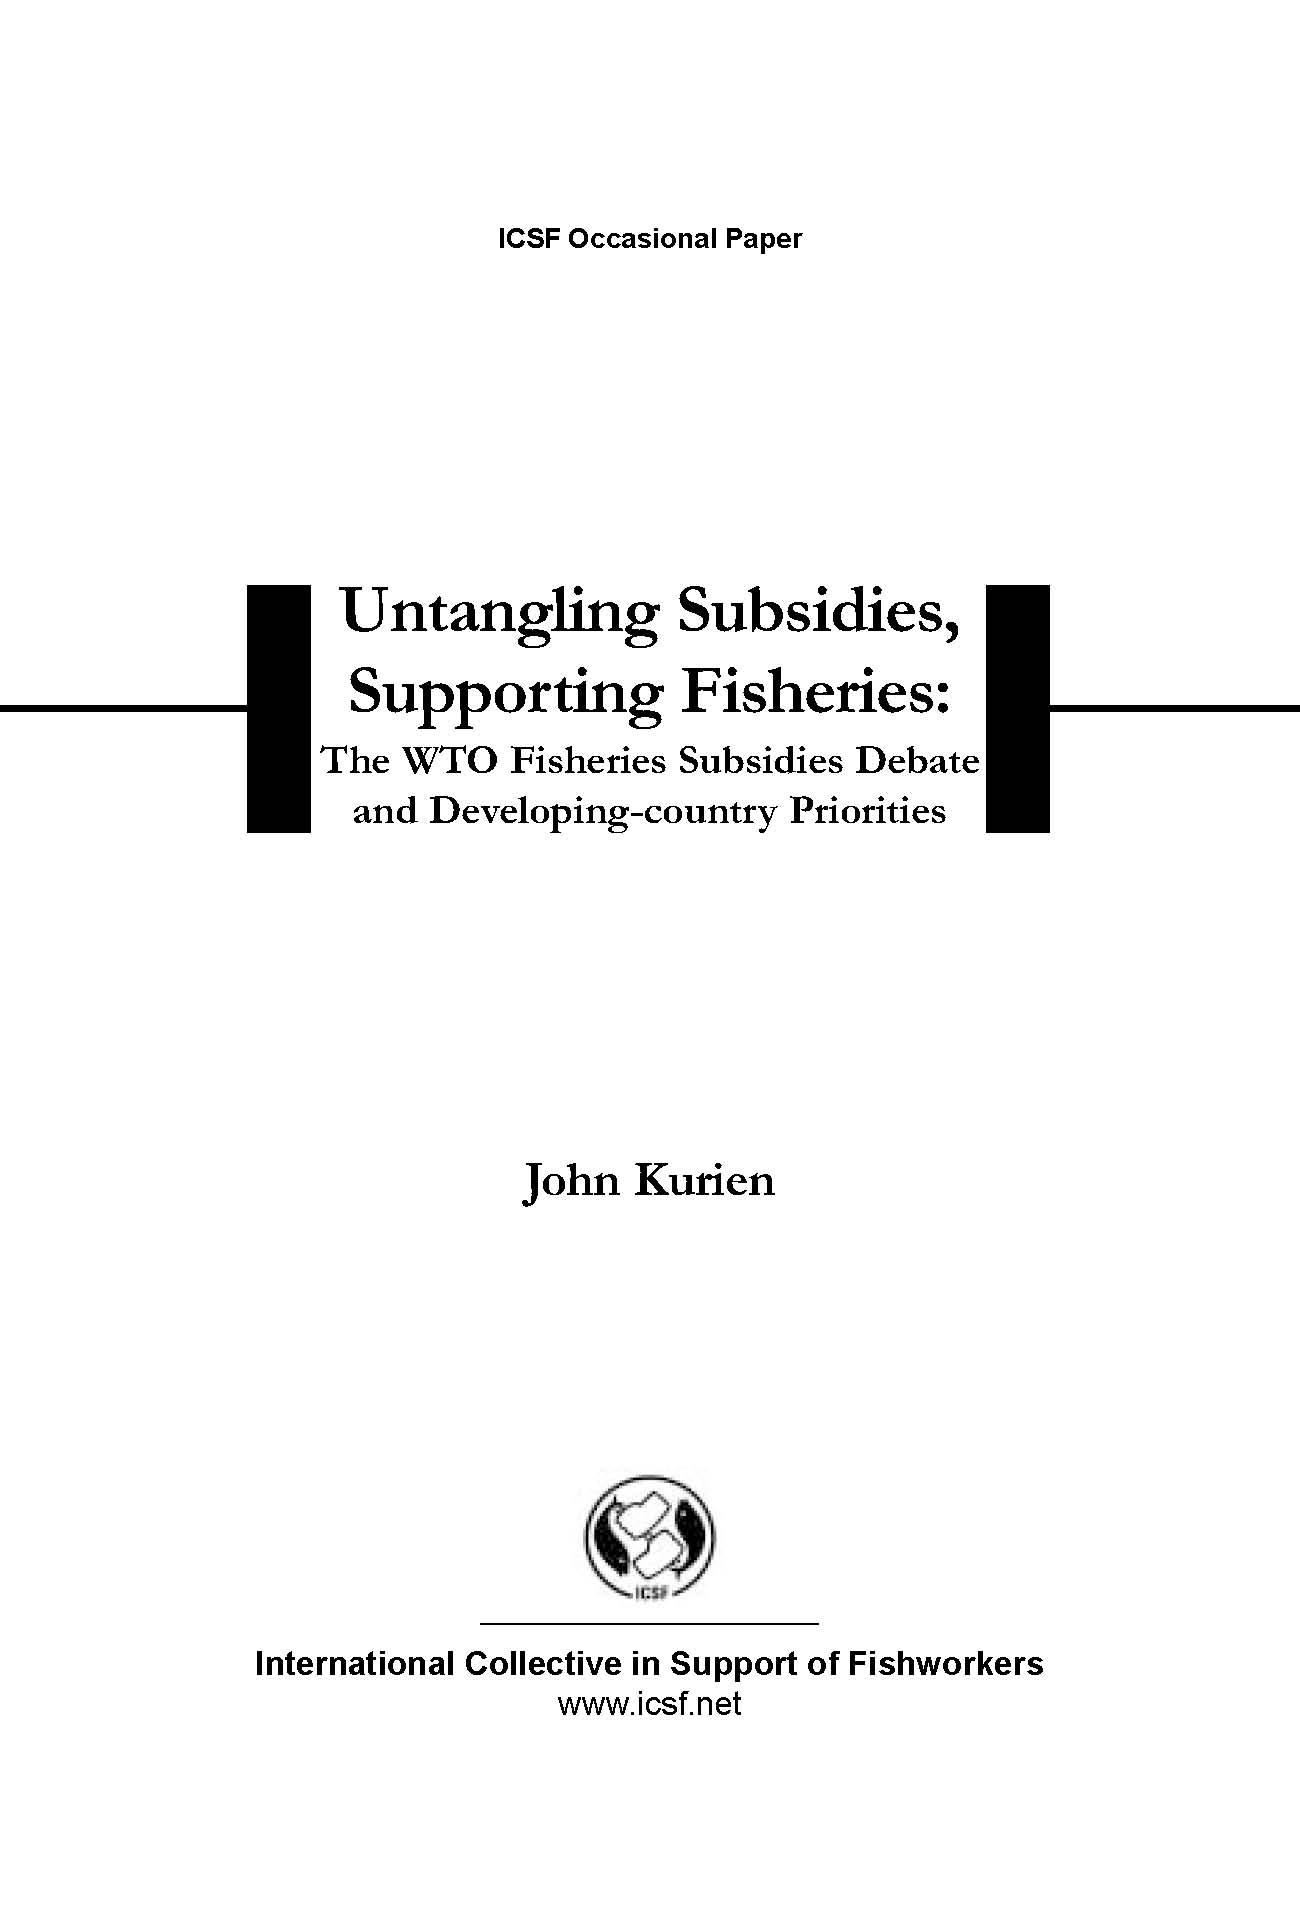 Untangling subsidies, supporting fisheries: The WTO fisheries subsidies debate and developing-country priorities